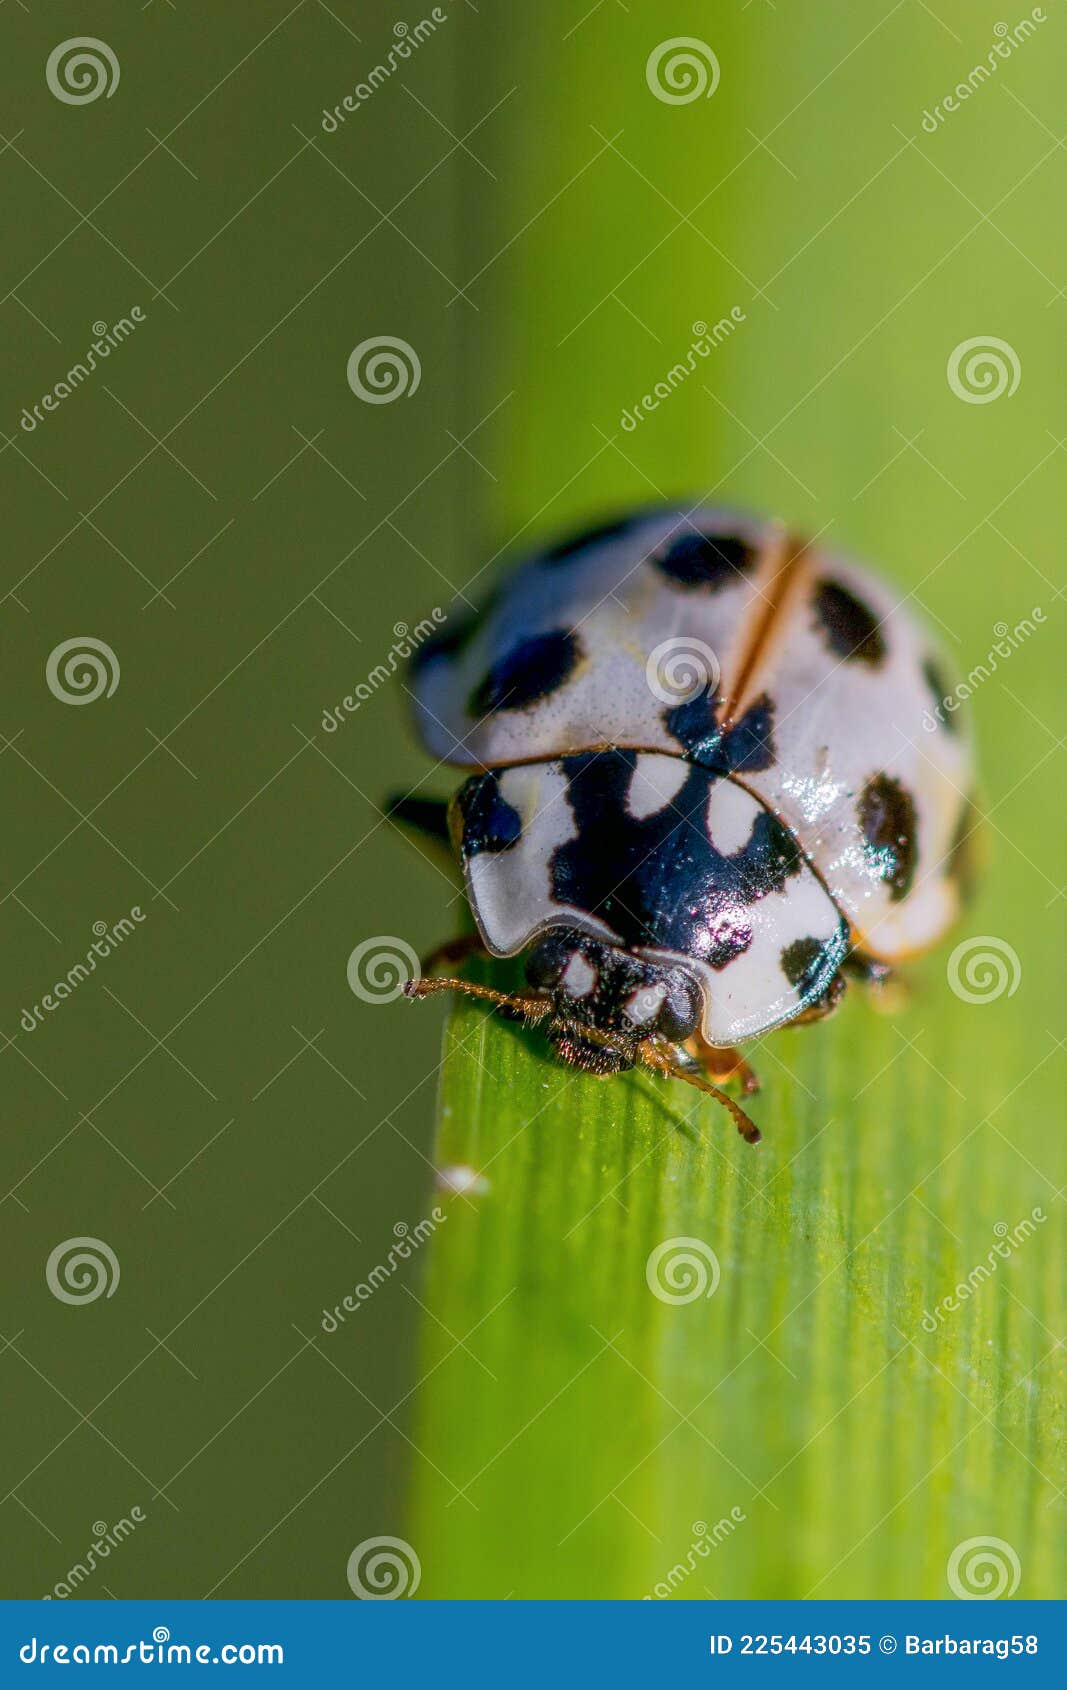 15 spotted ladybug anatis labiculata white lady beetle with black spots